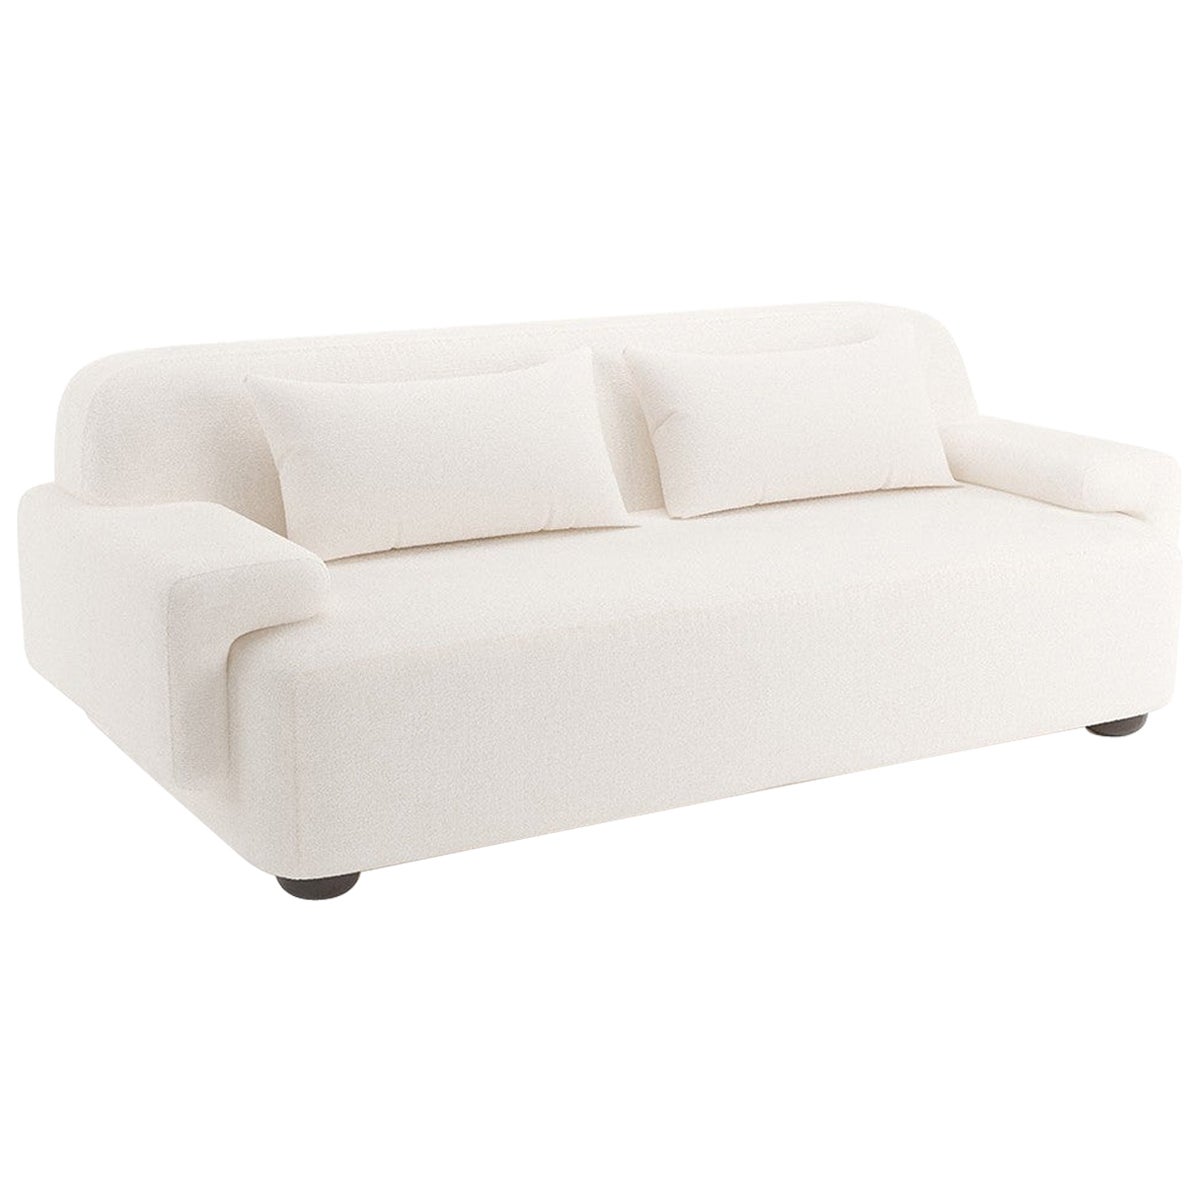 Popus Editions Lena 4 Seater Sofa in Egg Shell Off-White Malmoe Terry Fabric